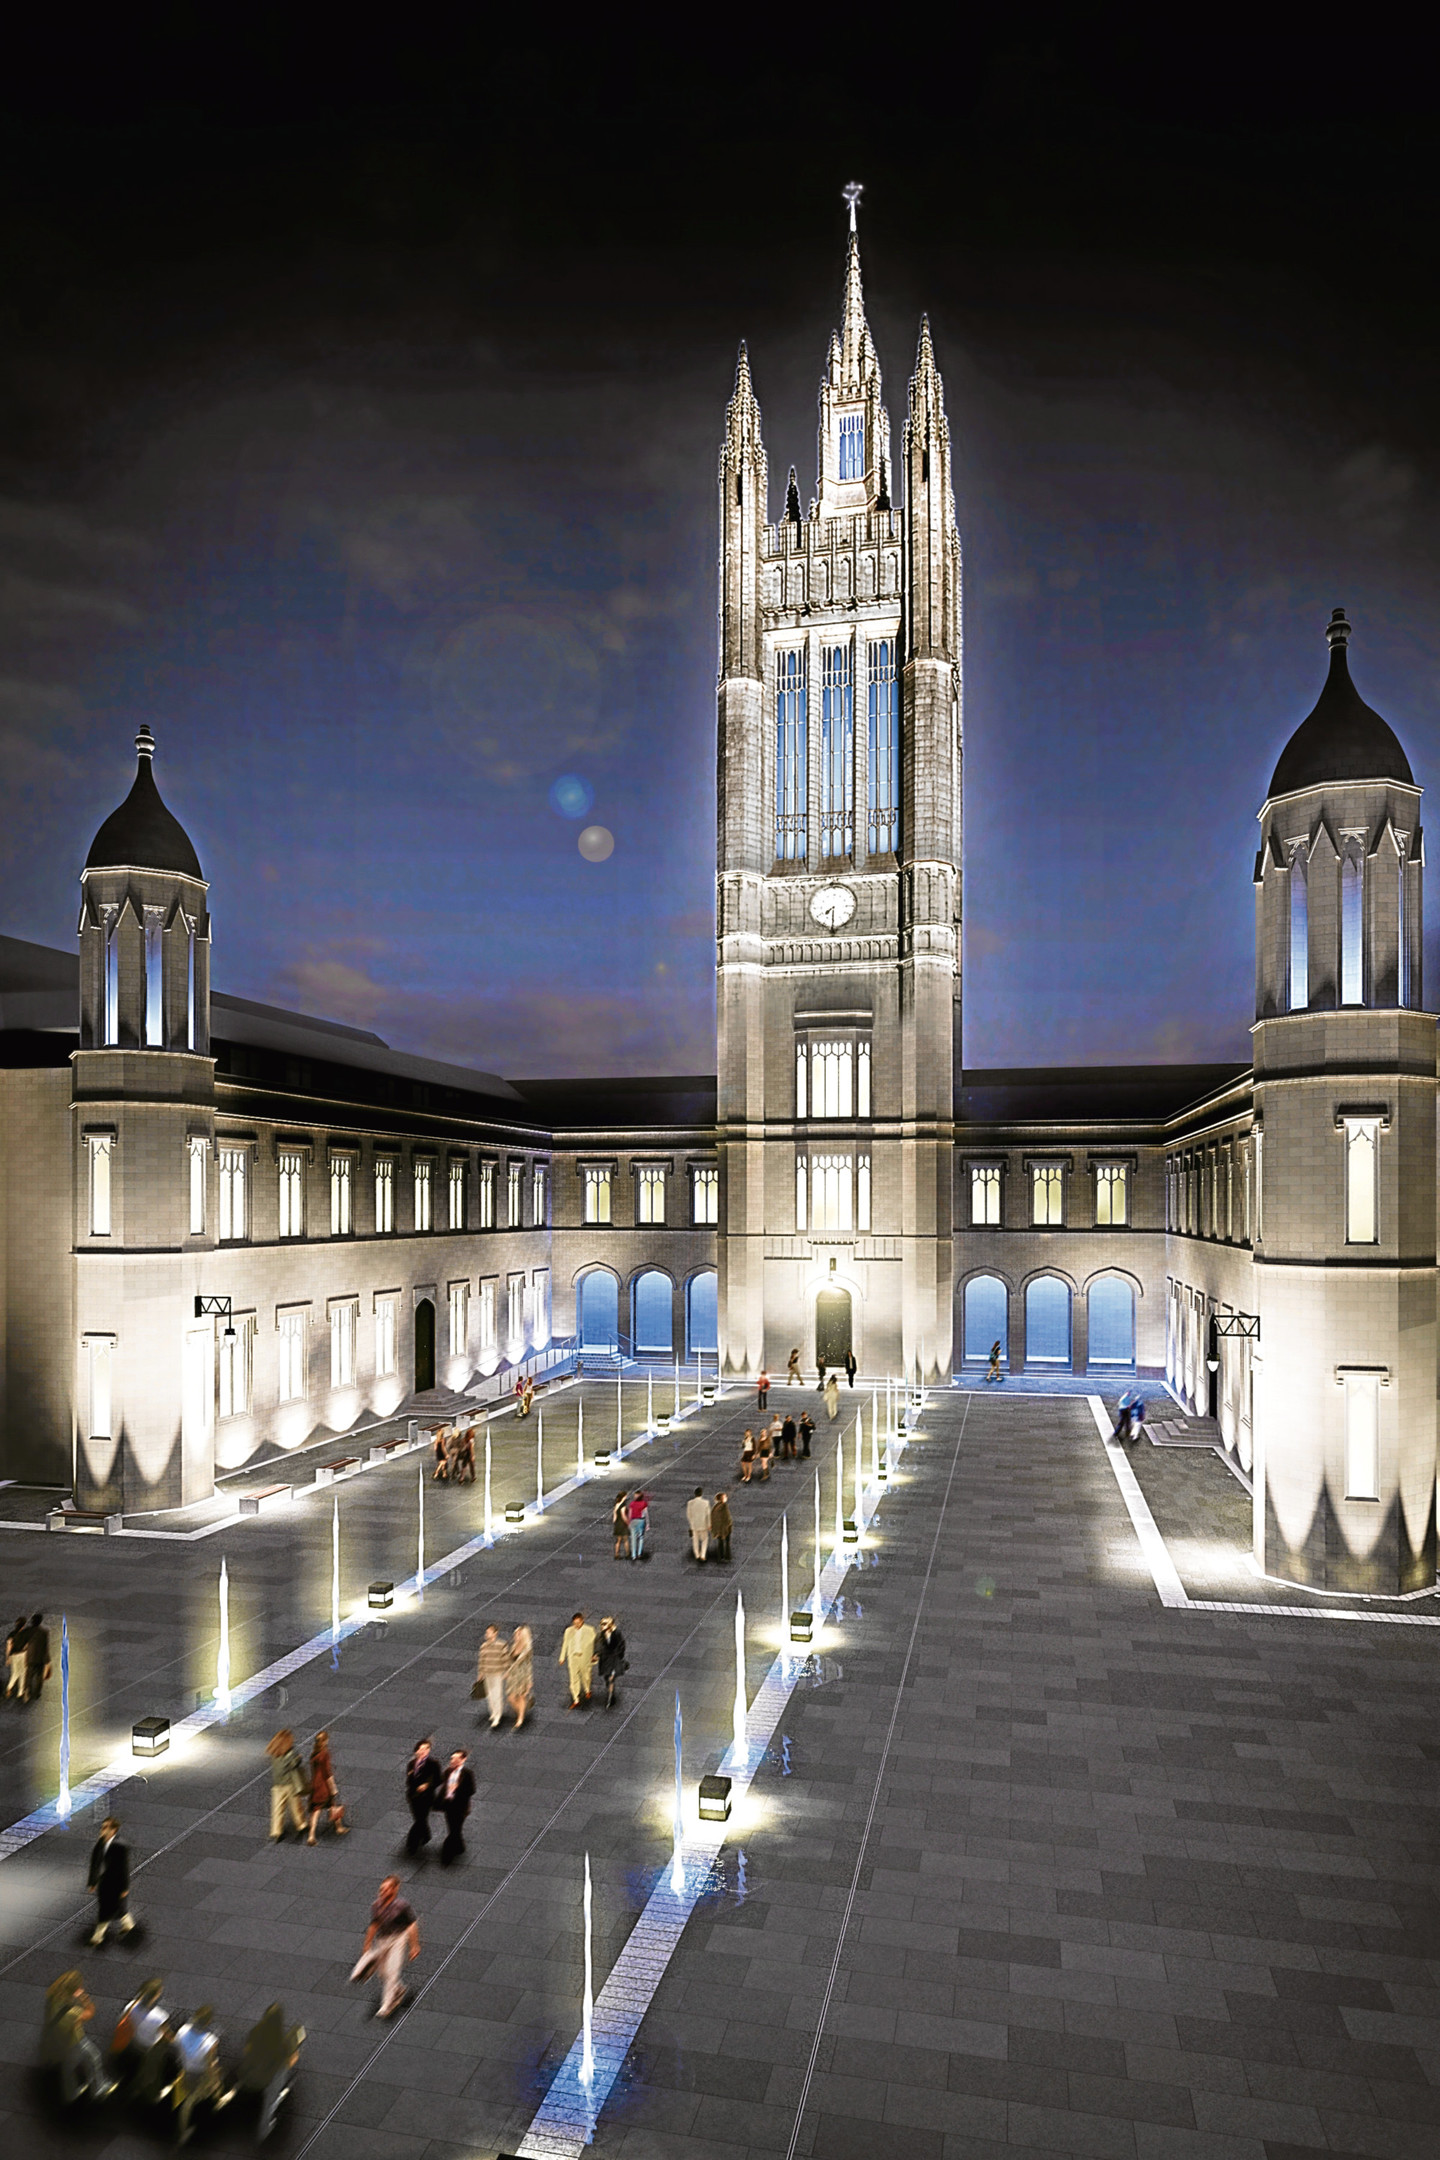 The landscape treatment of the quadrangle is to be revised to be fullyhard surface to allow concerts to take place in the space, this supersedes the previous design which formed part of the Marischal redevelopment proposal